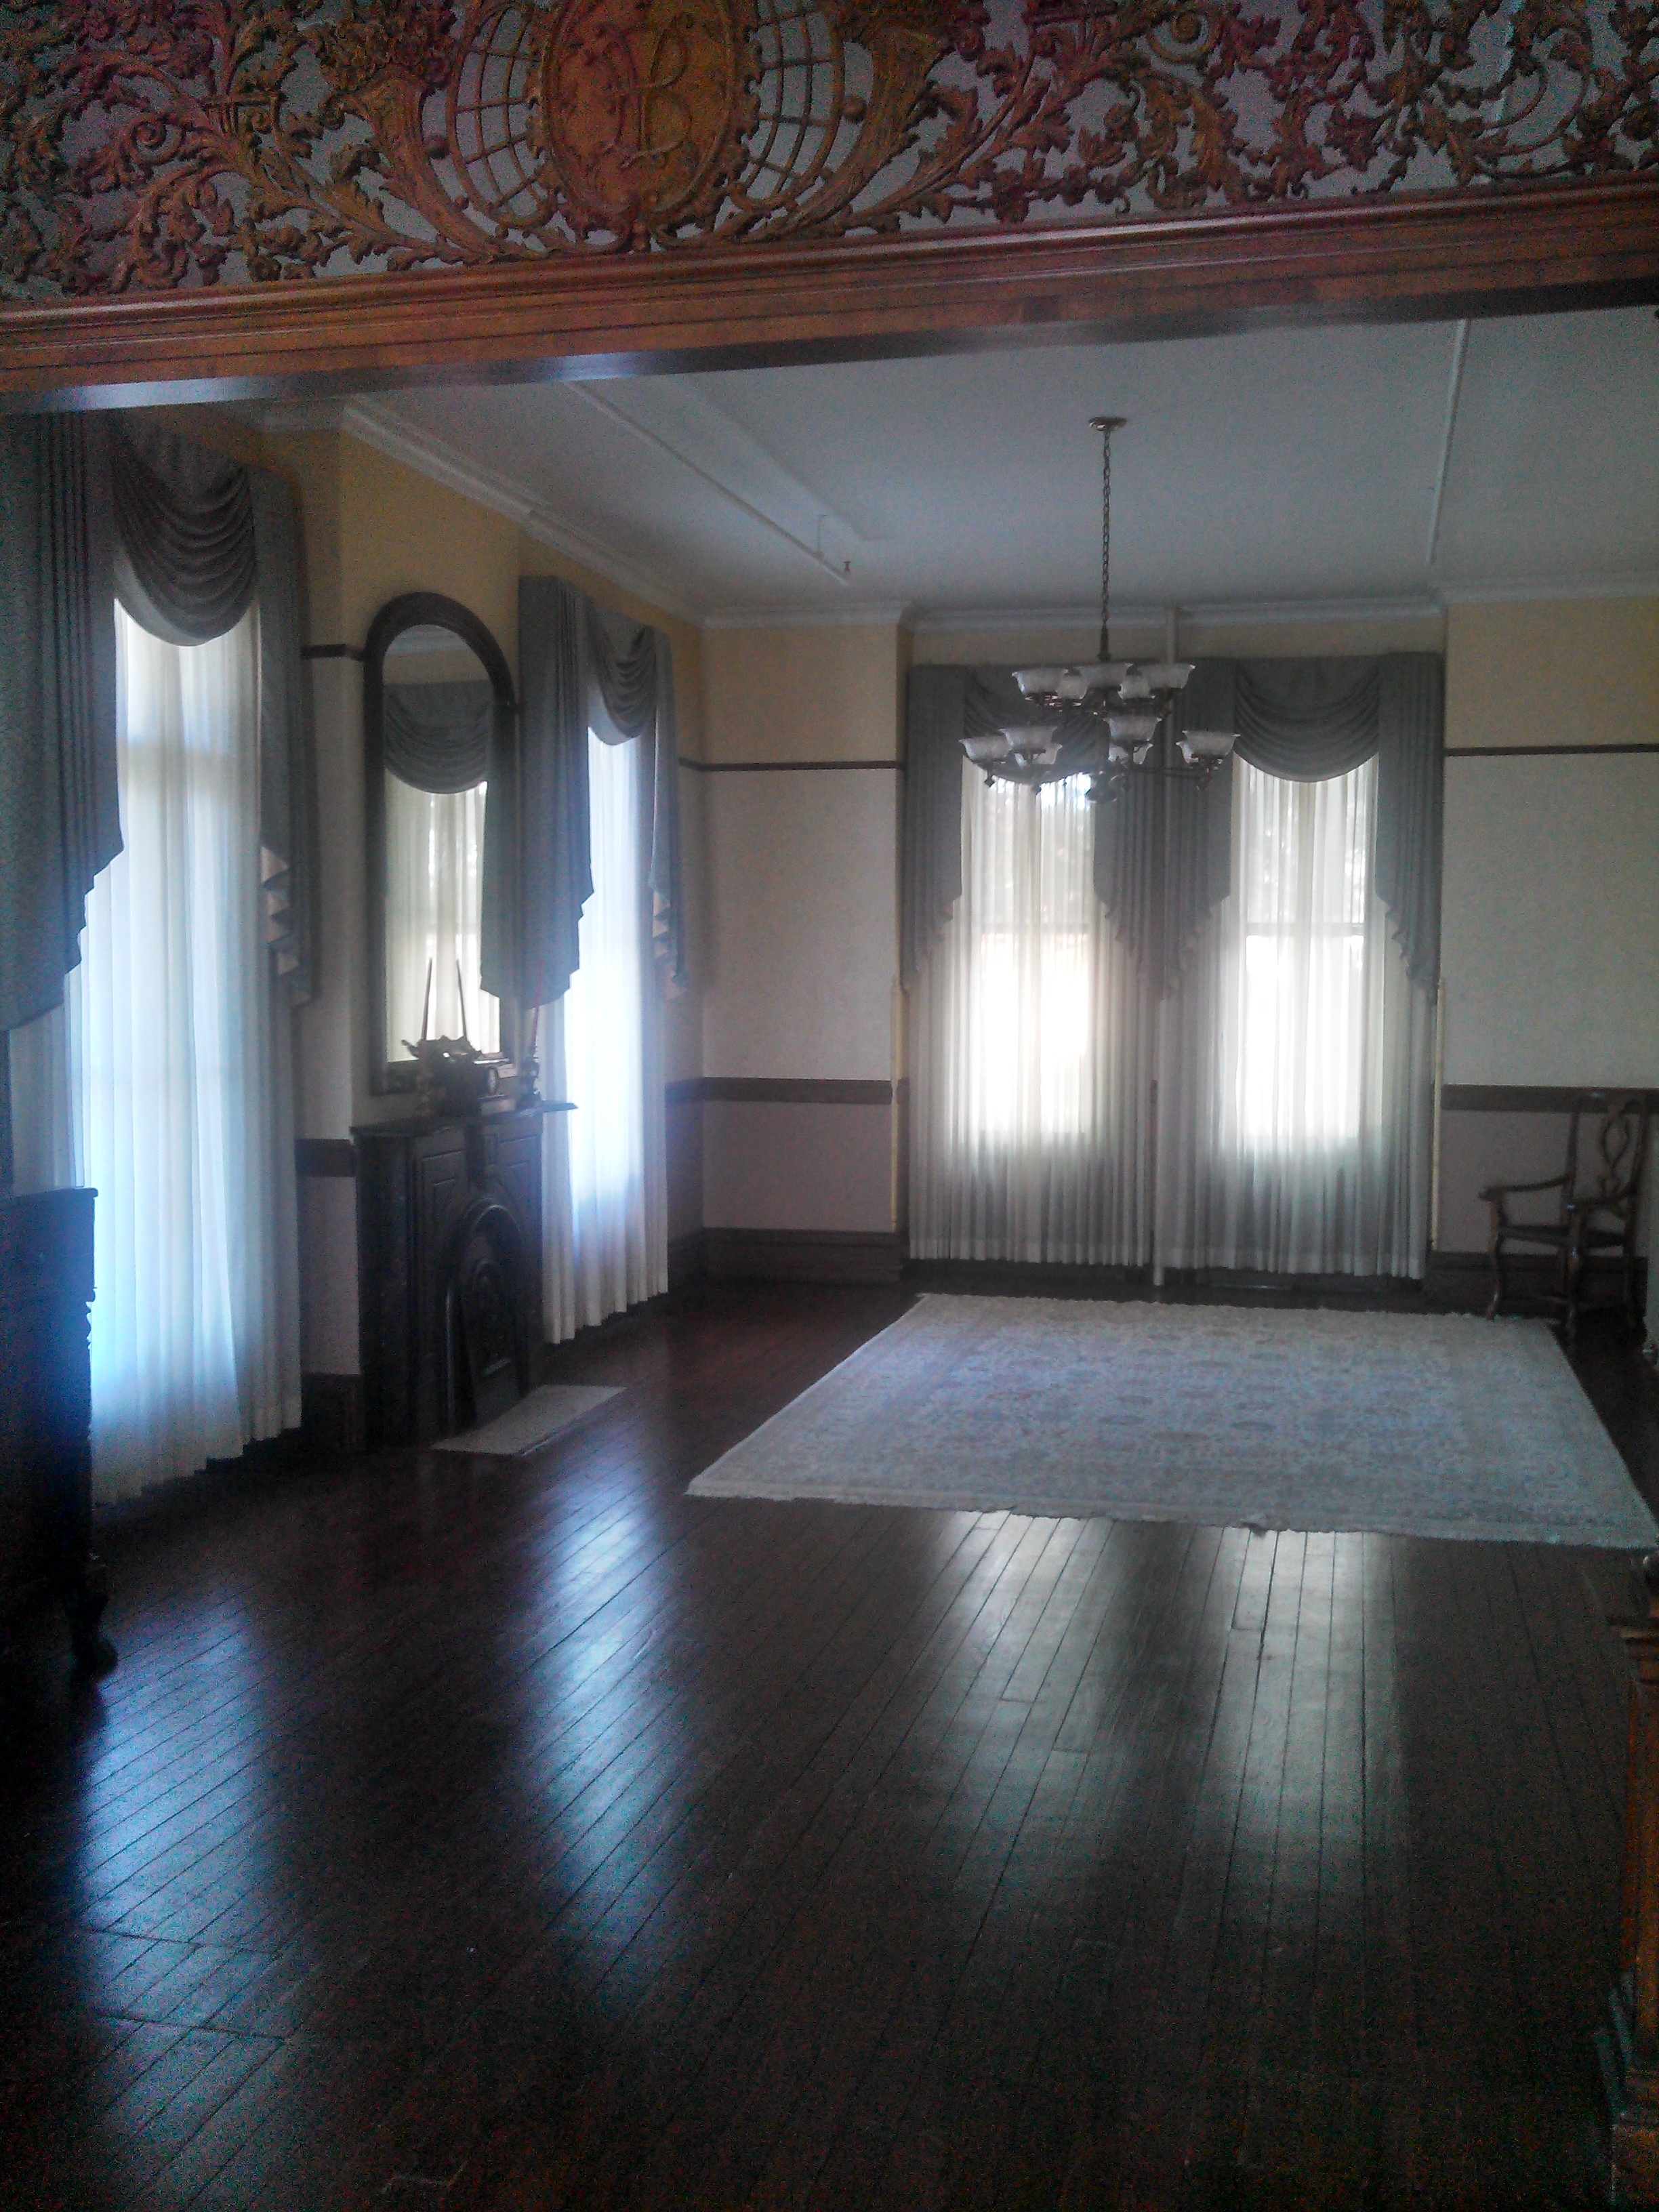 1_CHAC-Grand-Parlor-Photo-1